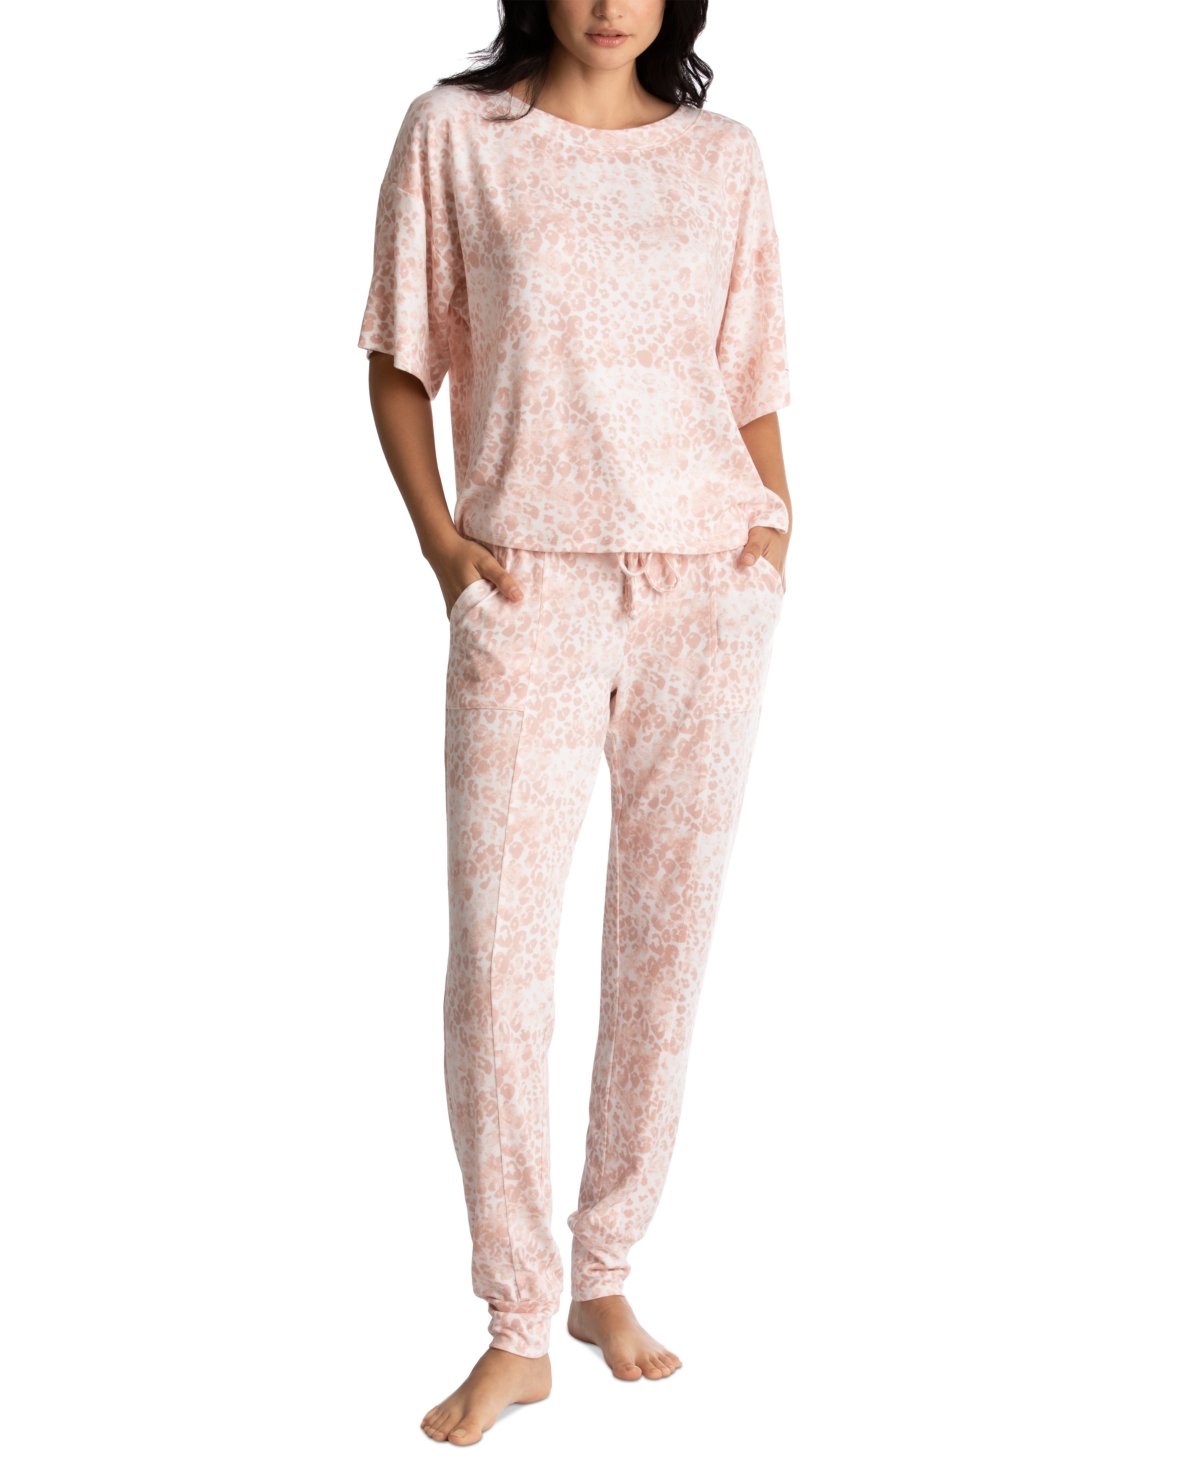 Midnight Bakery Alexis Printed Hacci Lounge Pajama Set In Cream